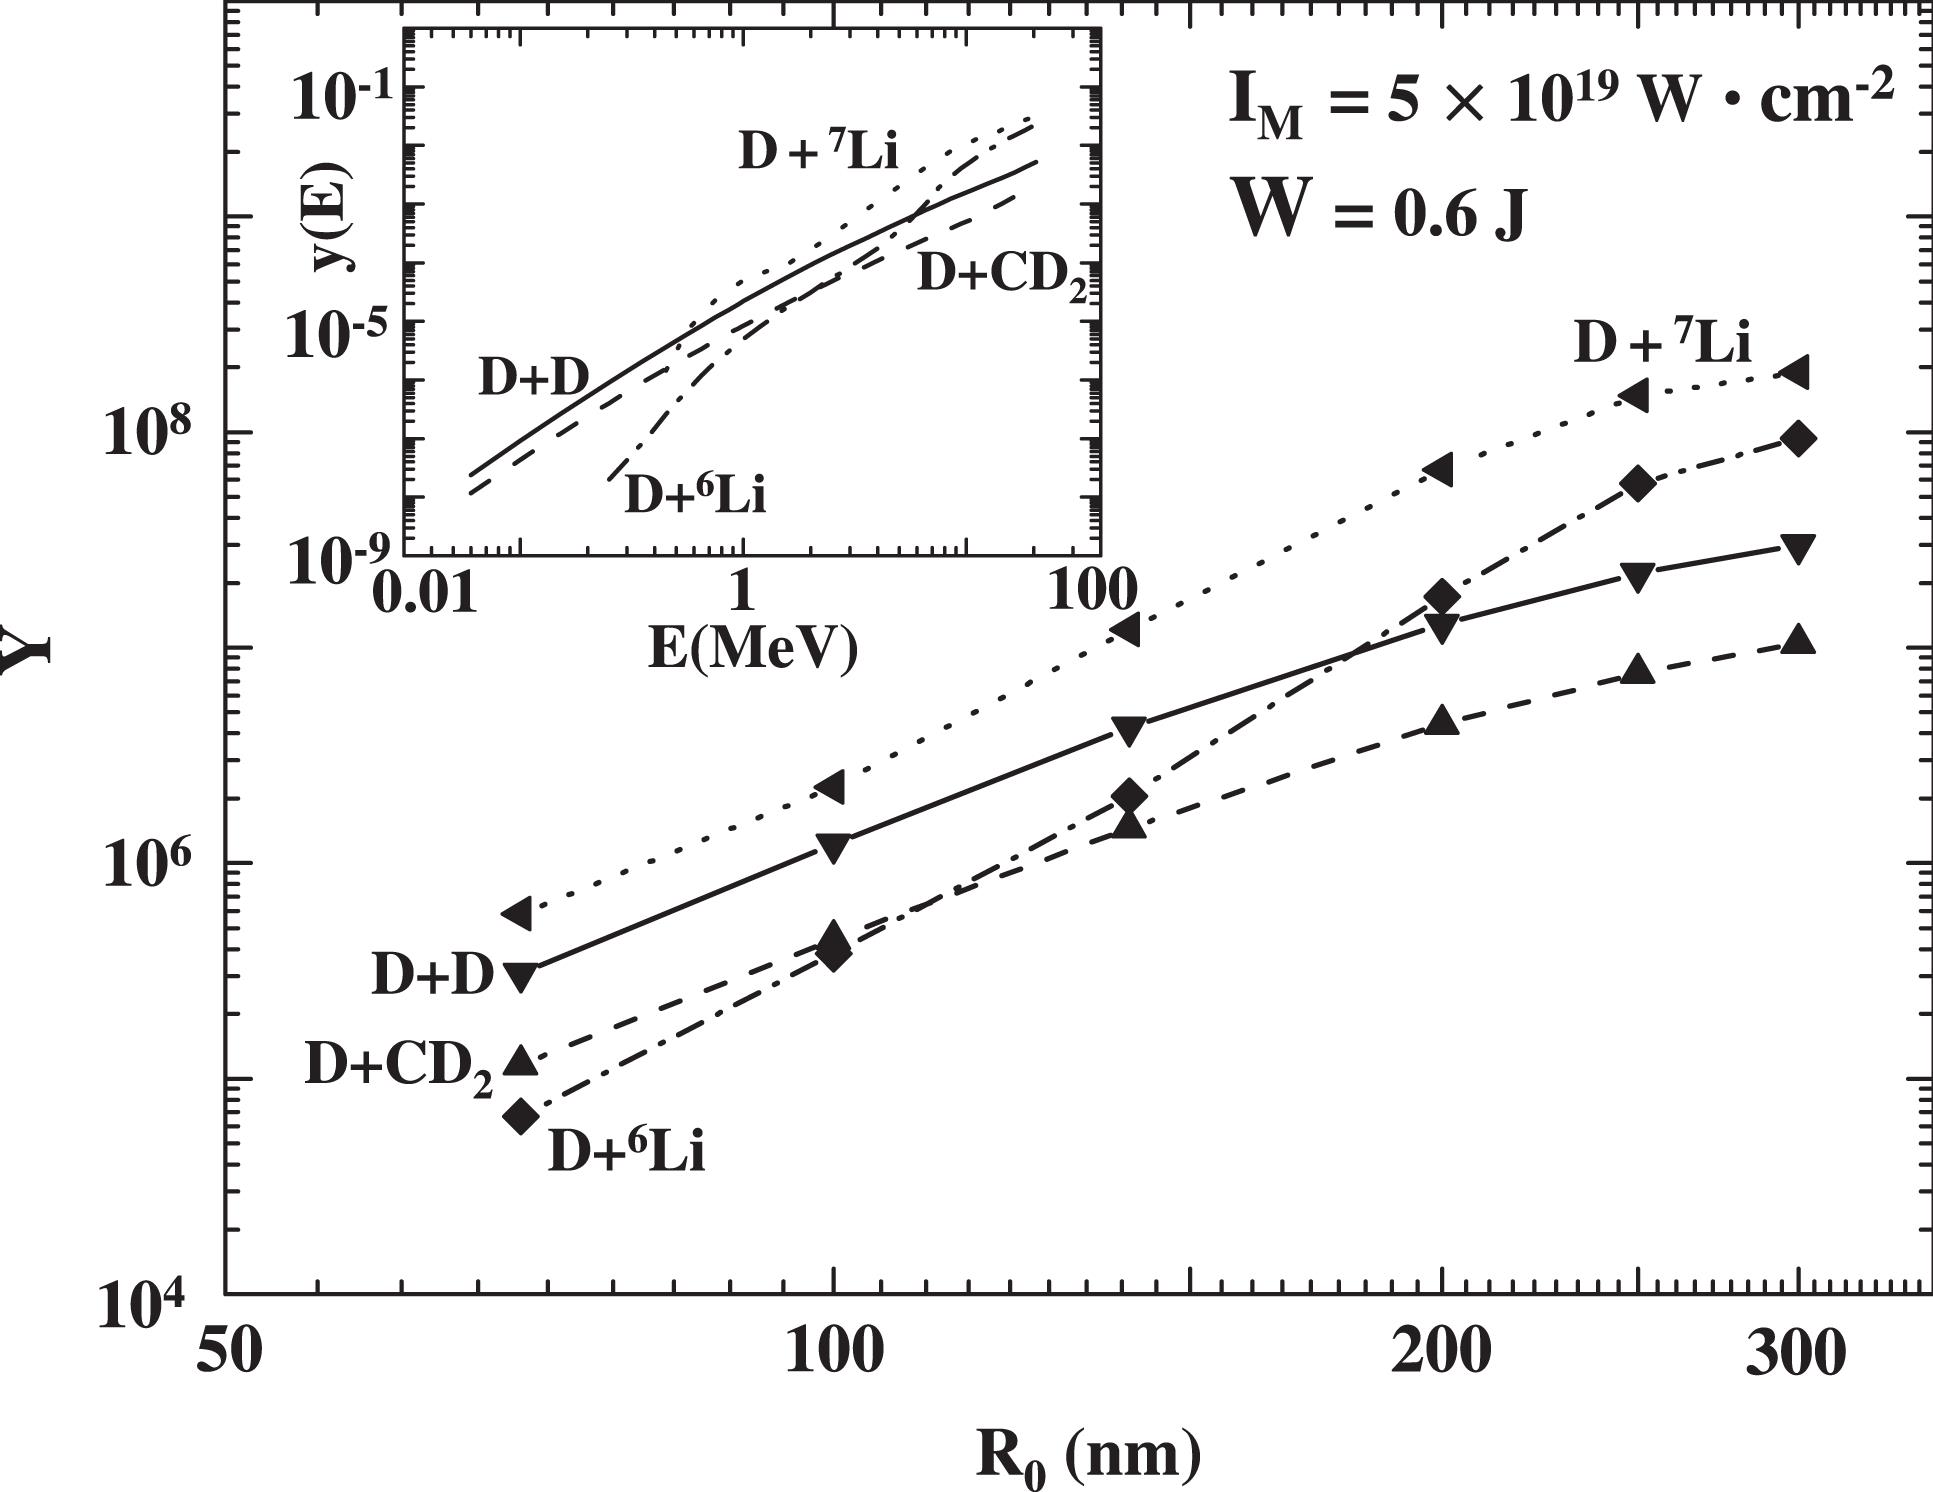 Nanodroplet size dependence of the table-top fusion yields , Equation (1), within the source–target design for the fusion of deuterons with a solid hollow cylinder of , , solid deuterium, and deuterated polyethylene , as marked on the curves. The laser parameters are , , and . The inset shows the energy dependence of the fusion reaction probability .